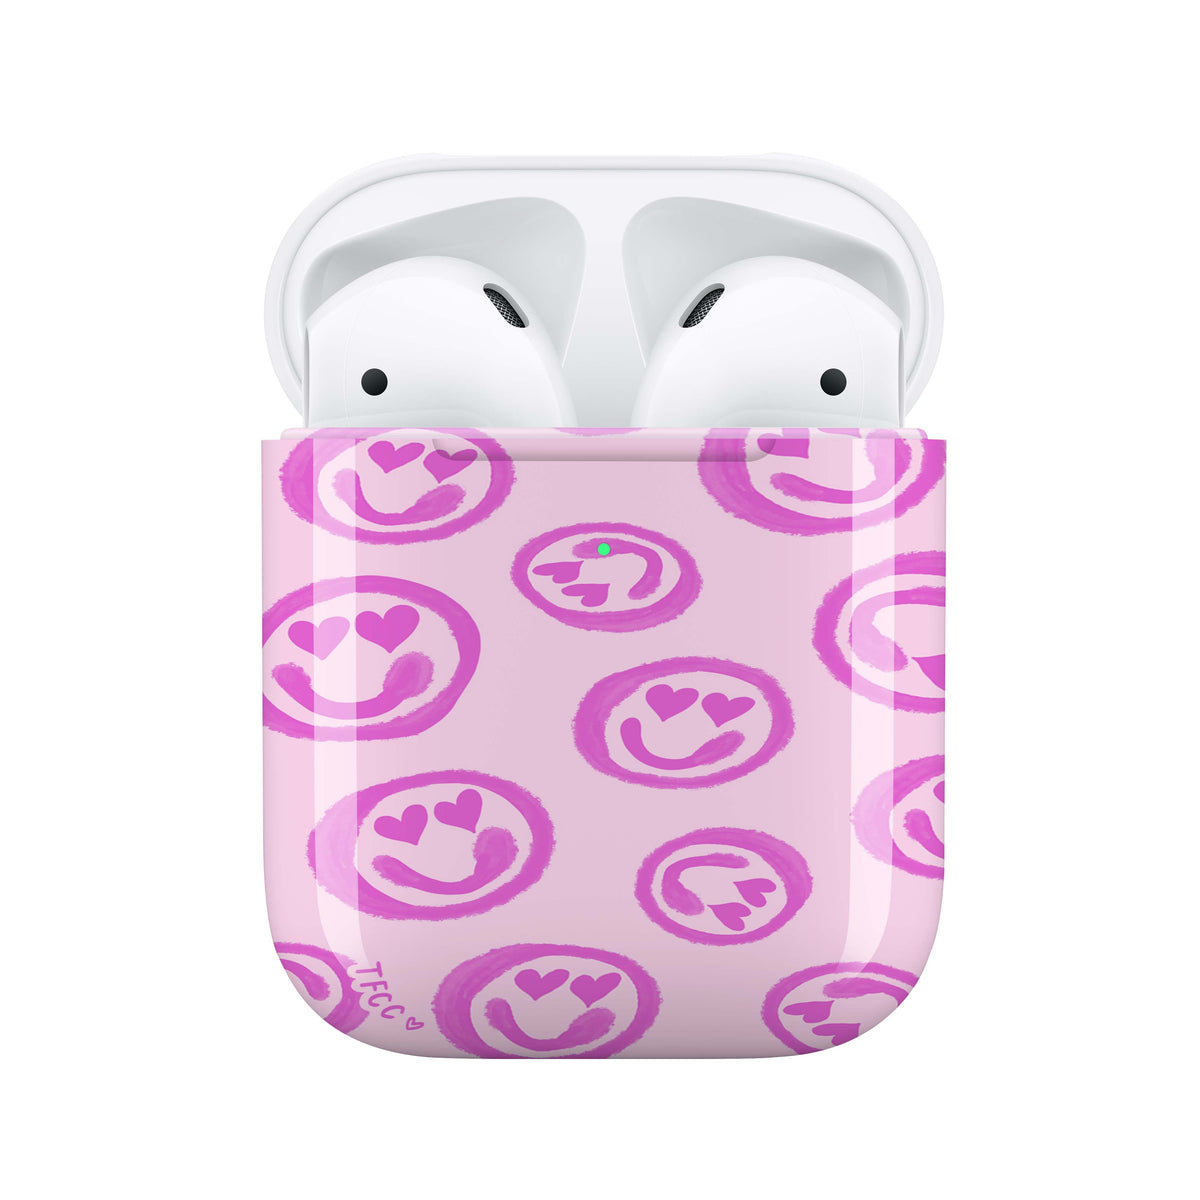 Smiley Face AirPods Case - thefonecasecompany